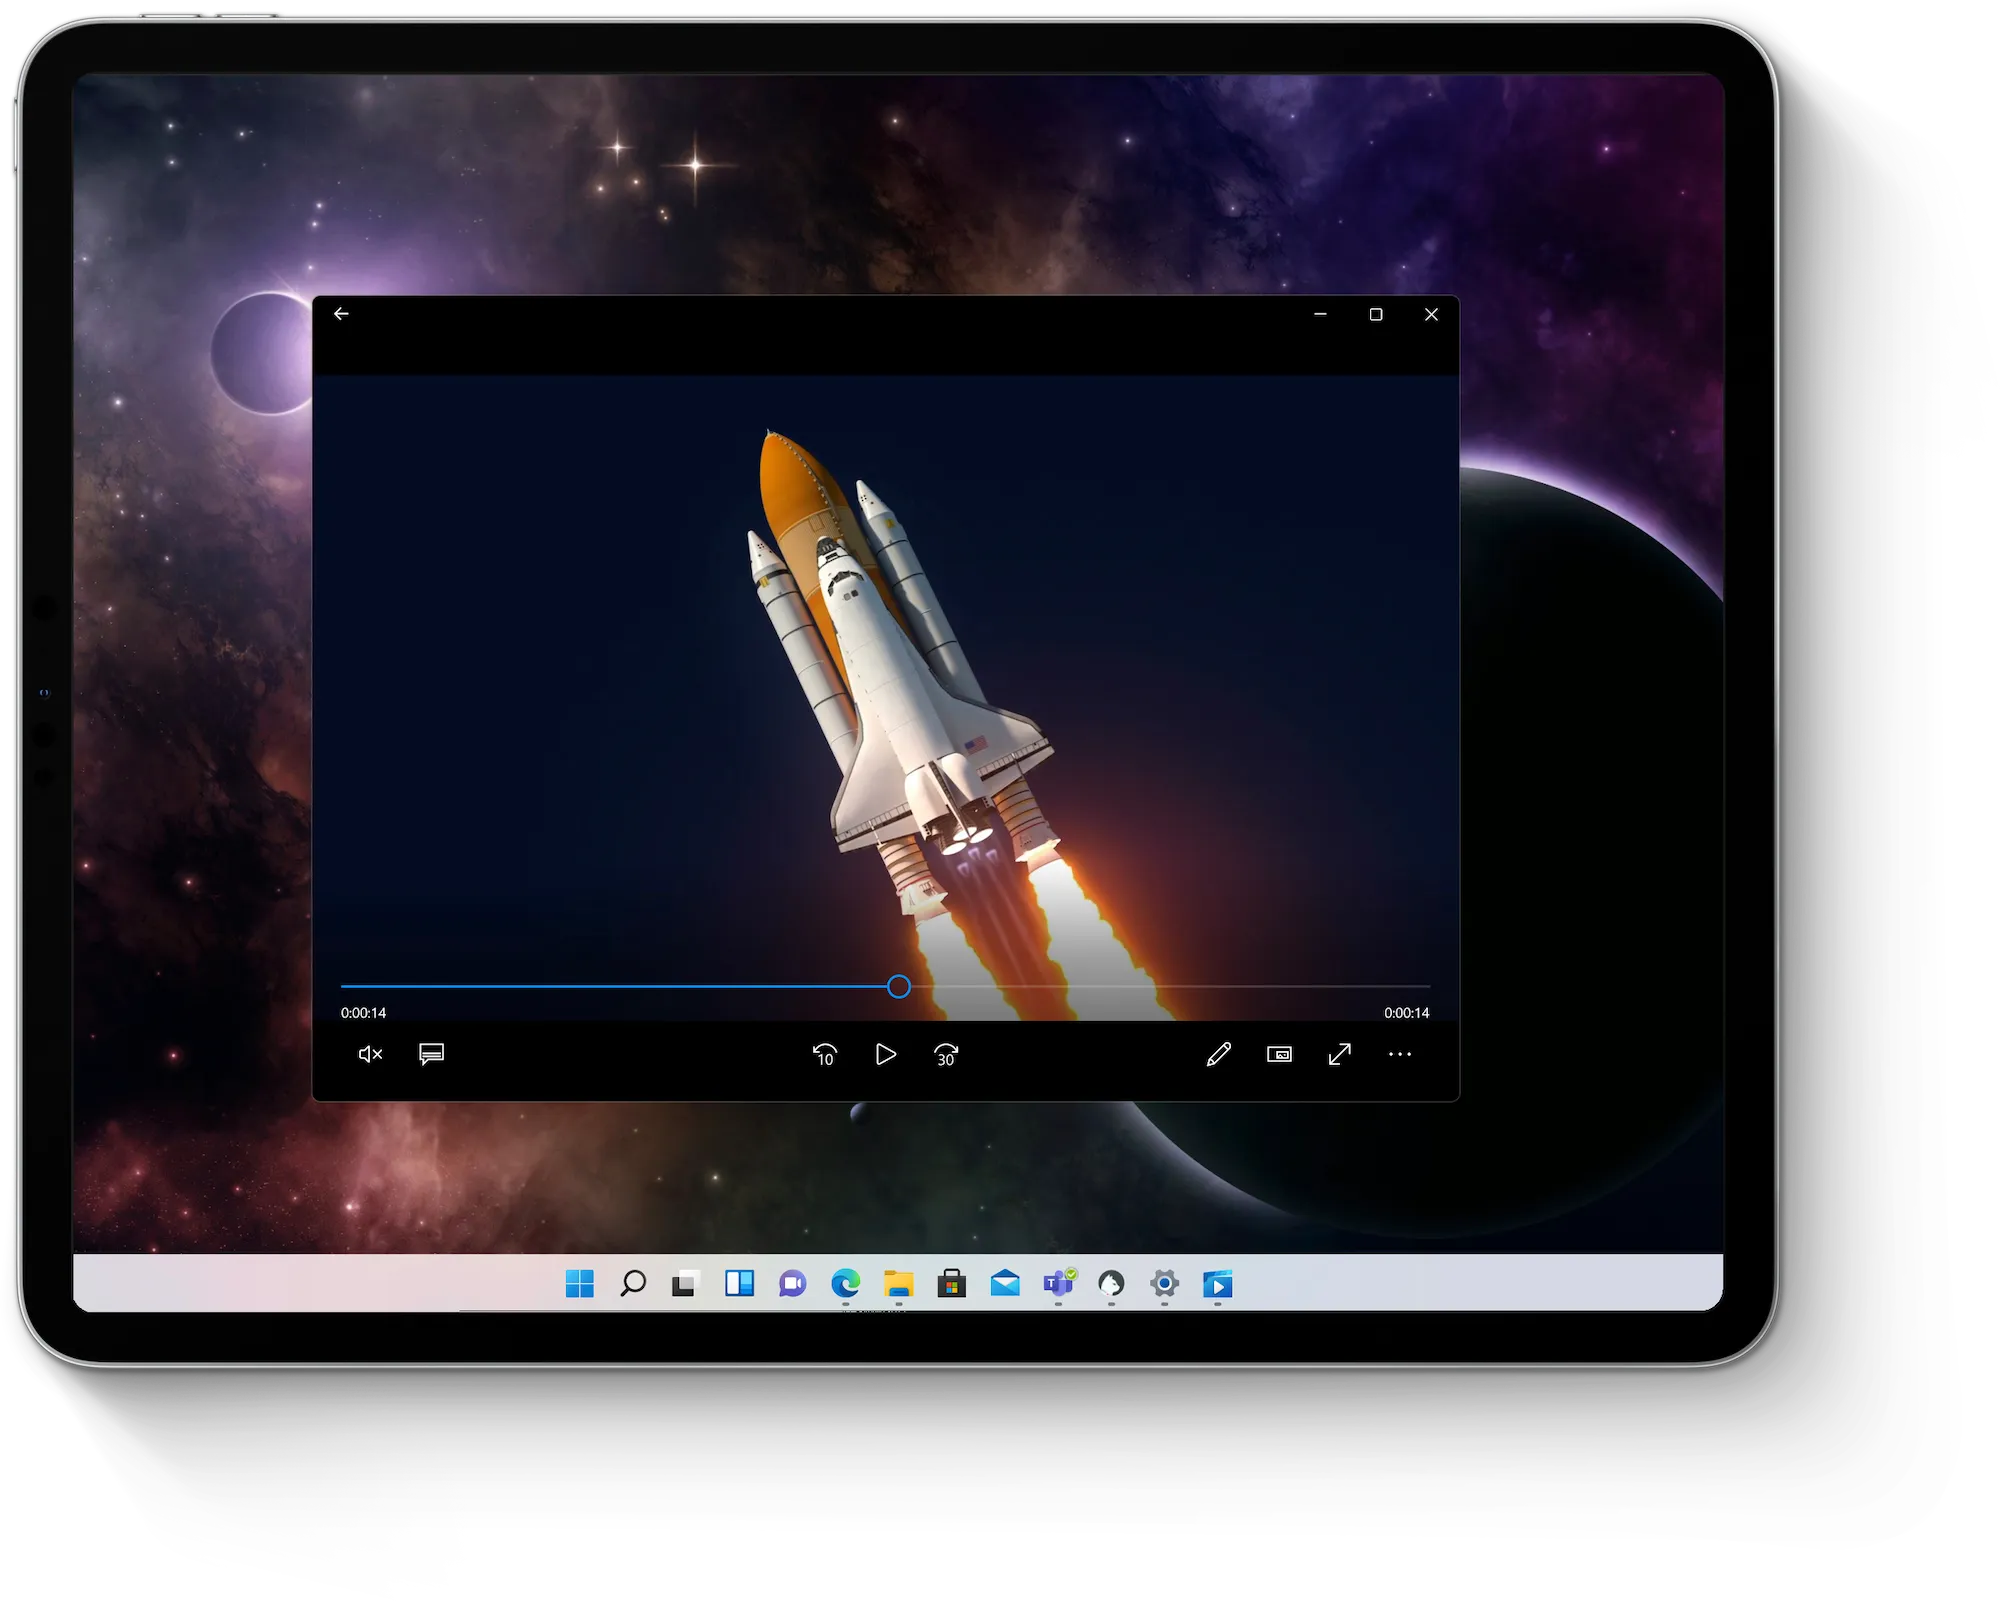 An iPad shows a video of a rocketship in space